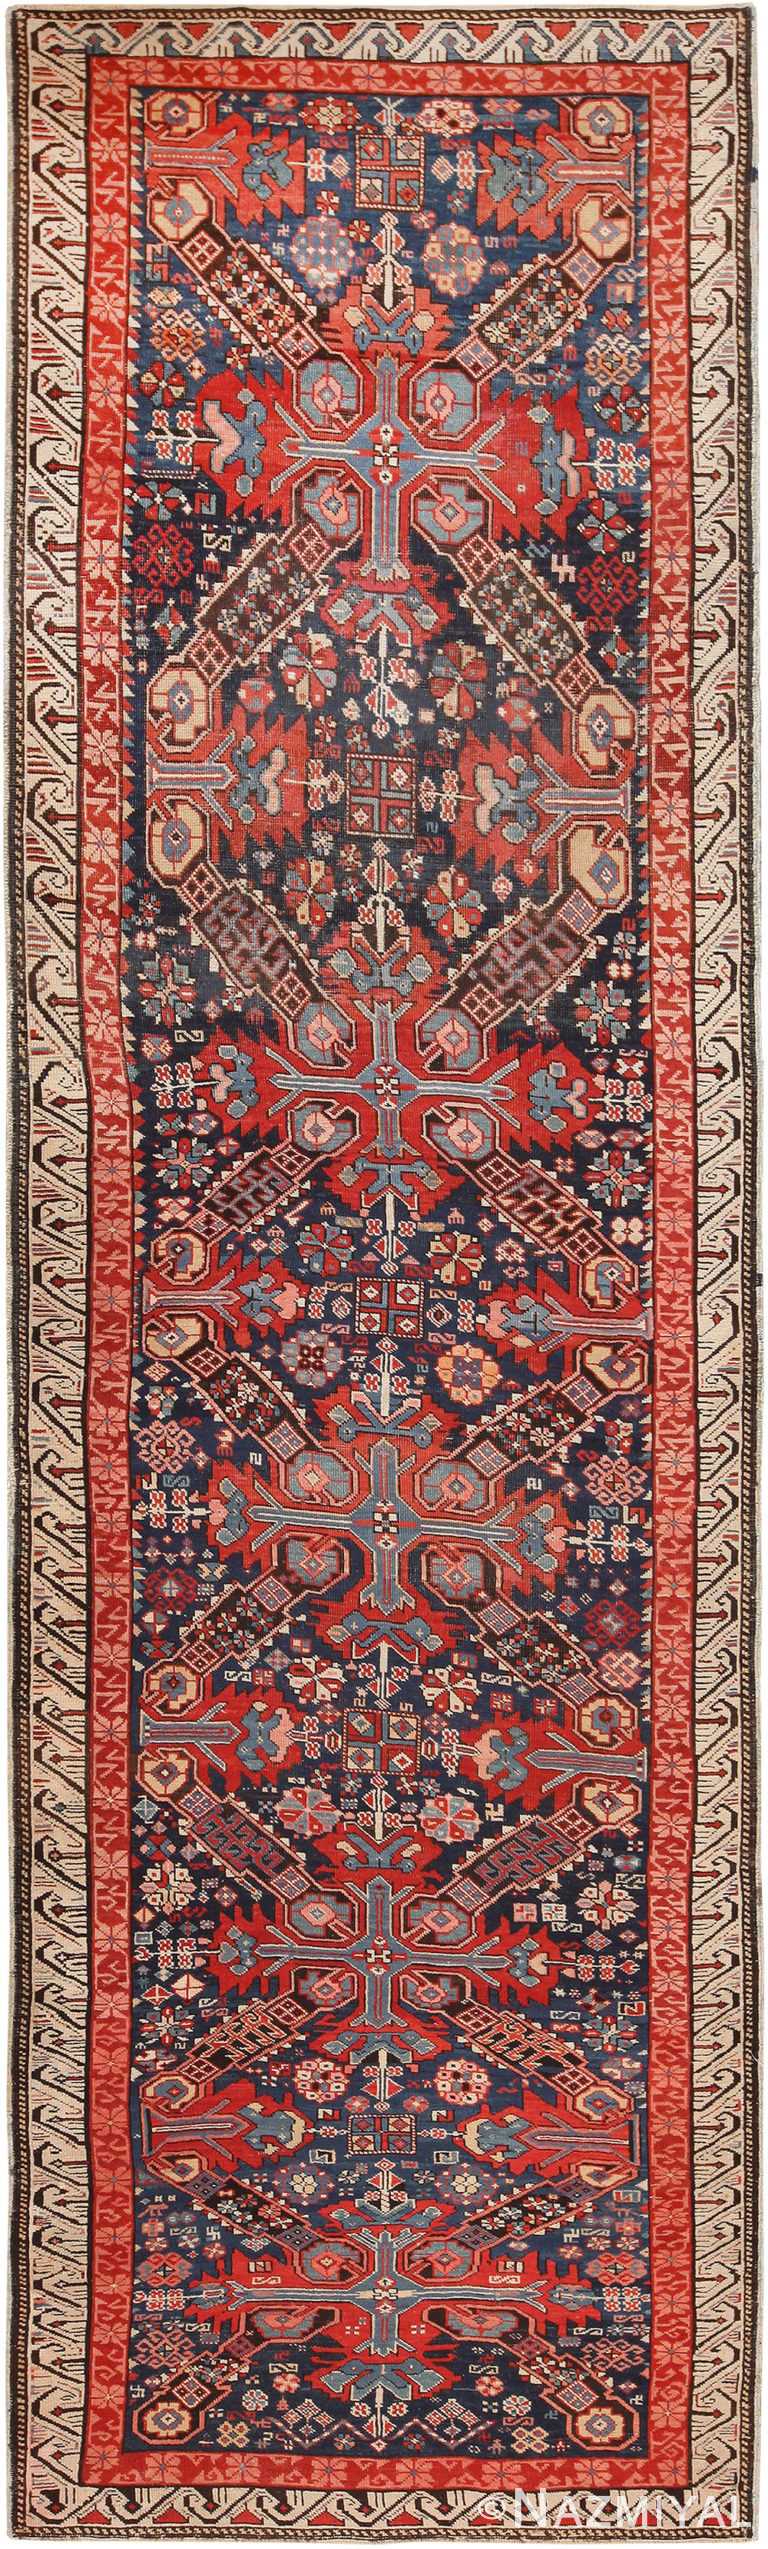 Antique Caucasian Seychour Runner Rug 70914 by Nazmiyal Antique Rugs